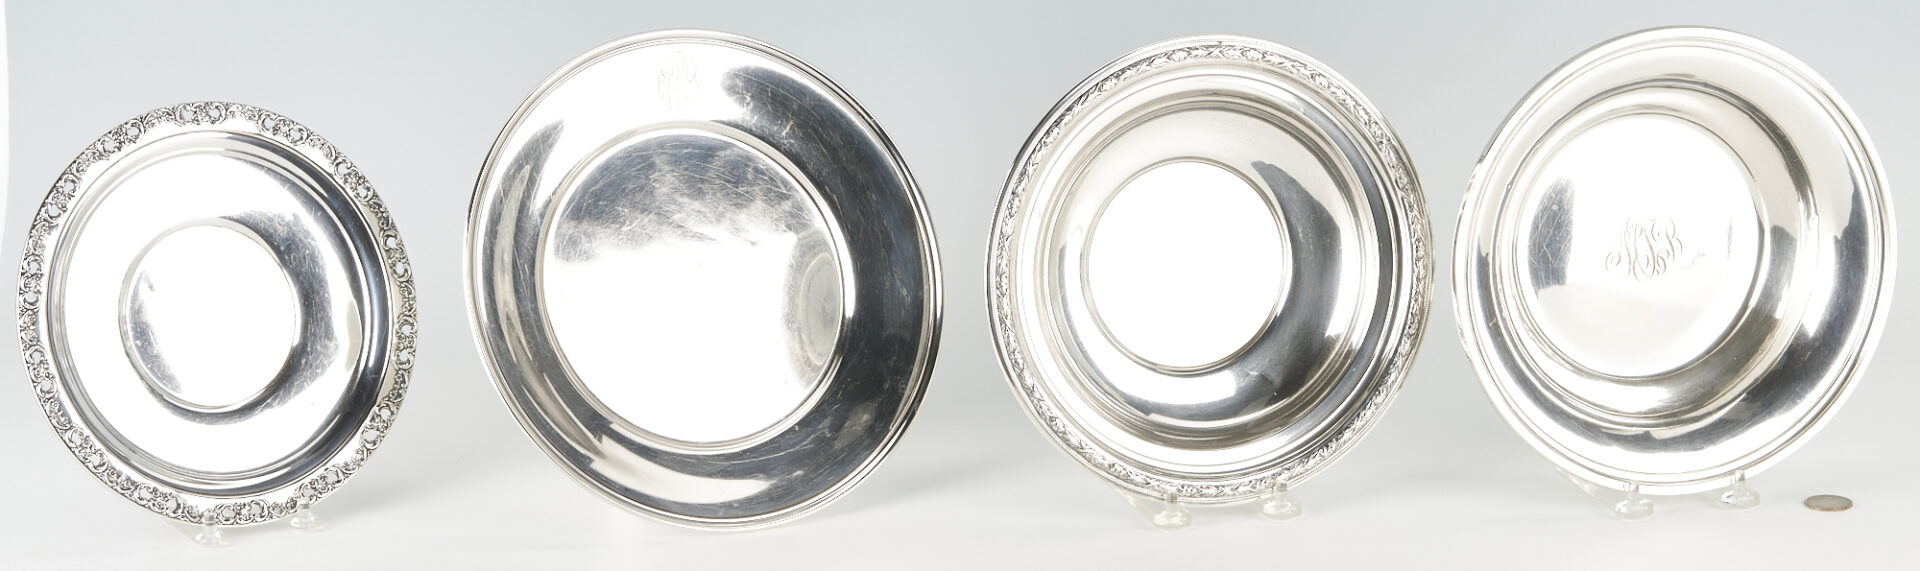 Lot 789: 4 Sterling Silver Hollowware Serving Dishes